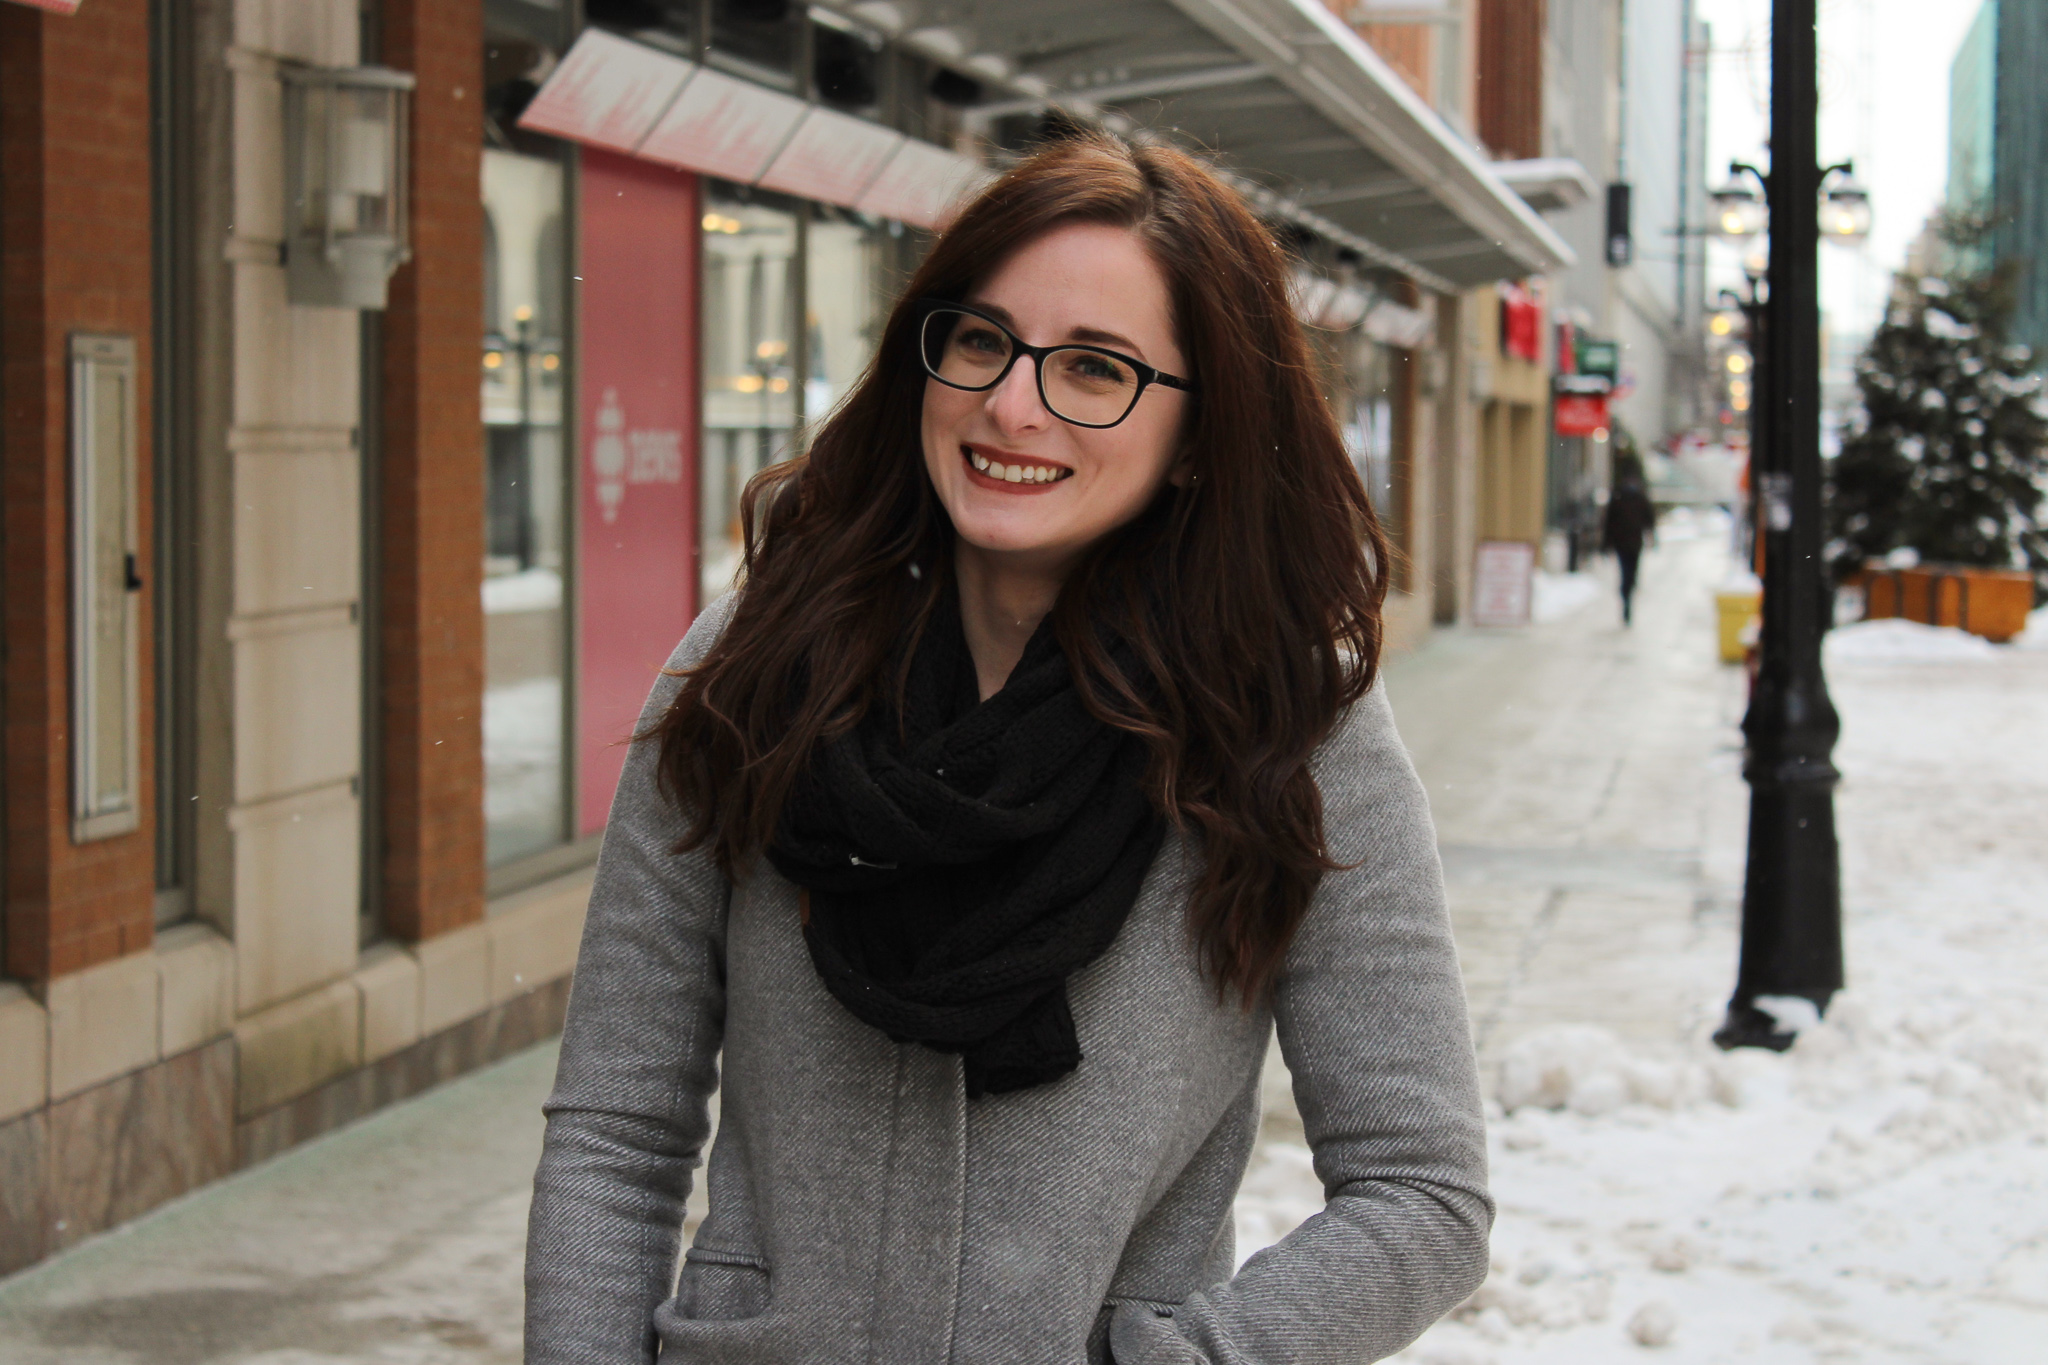 Caroline Marchand is a Algonquin TV broadcasting graduate and associate director for CBC Power and Politics.